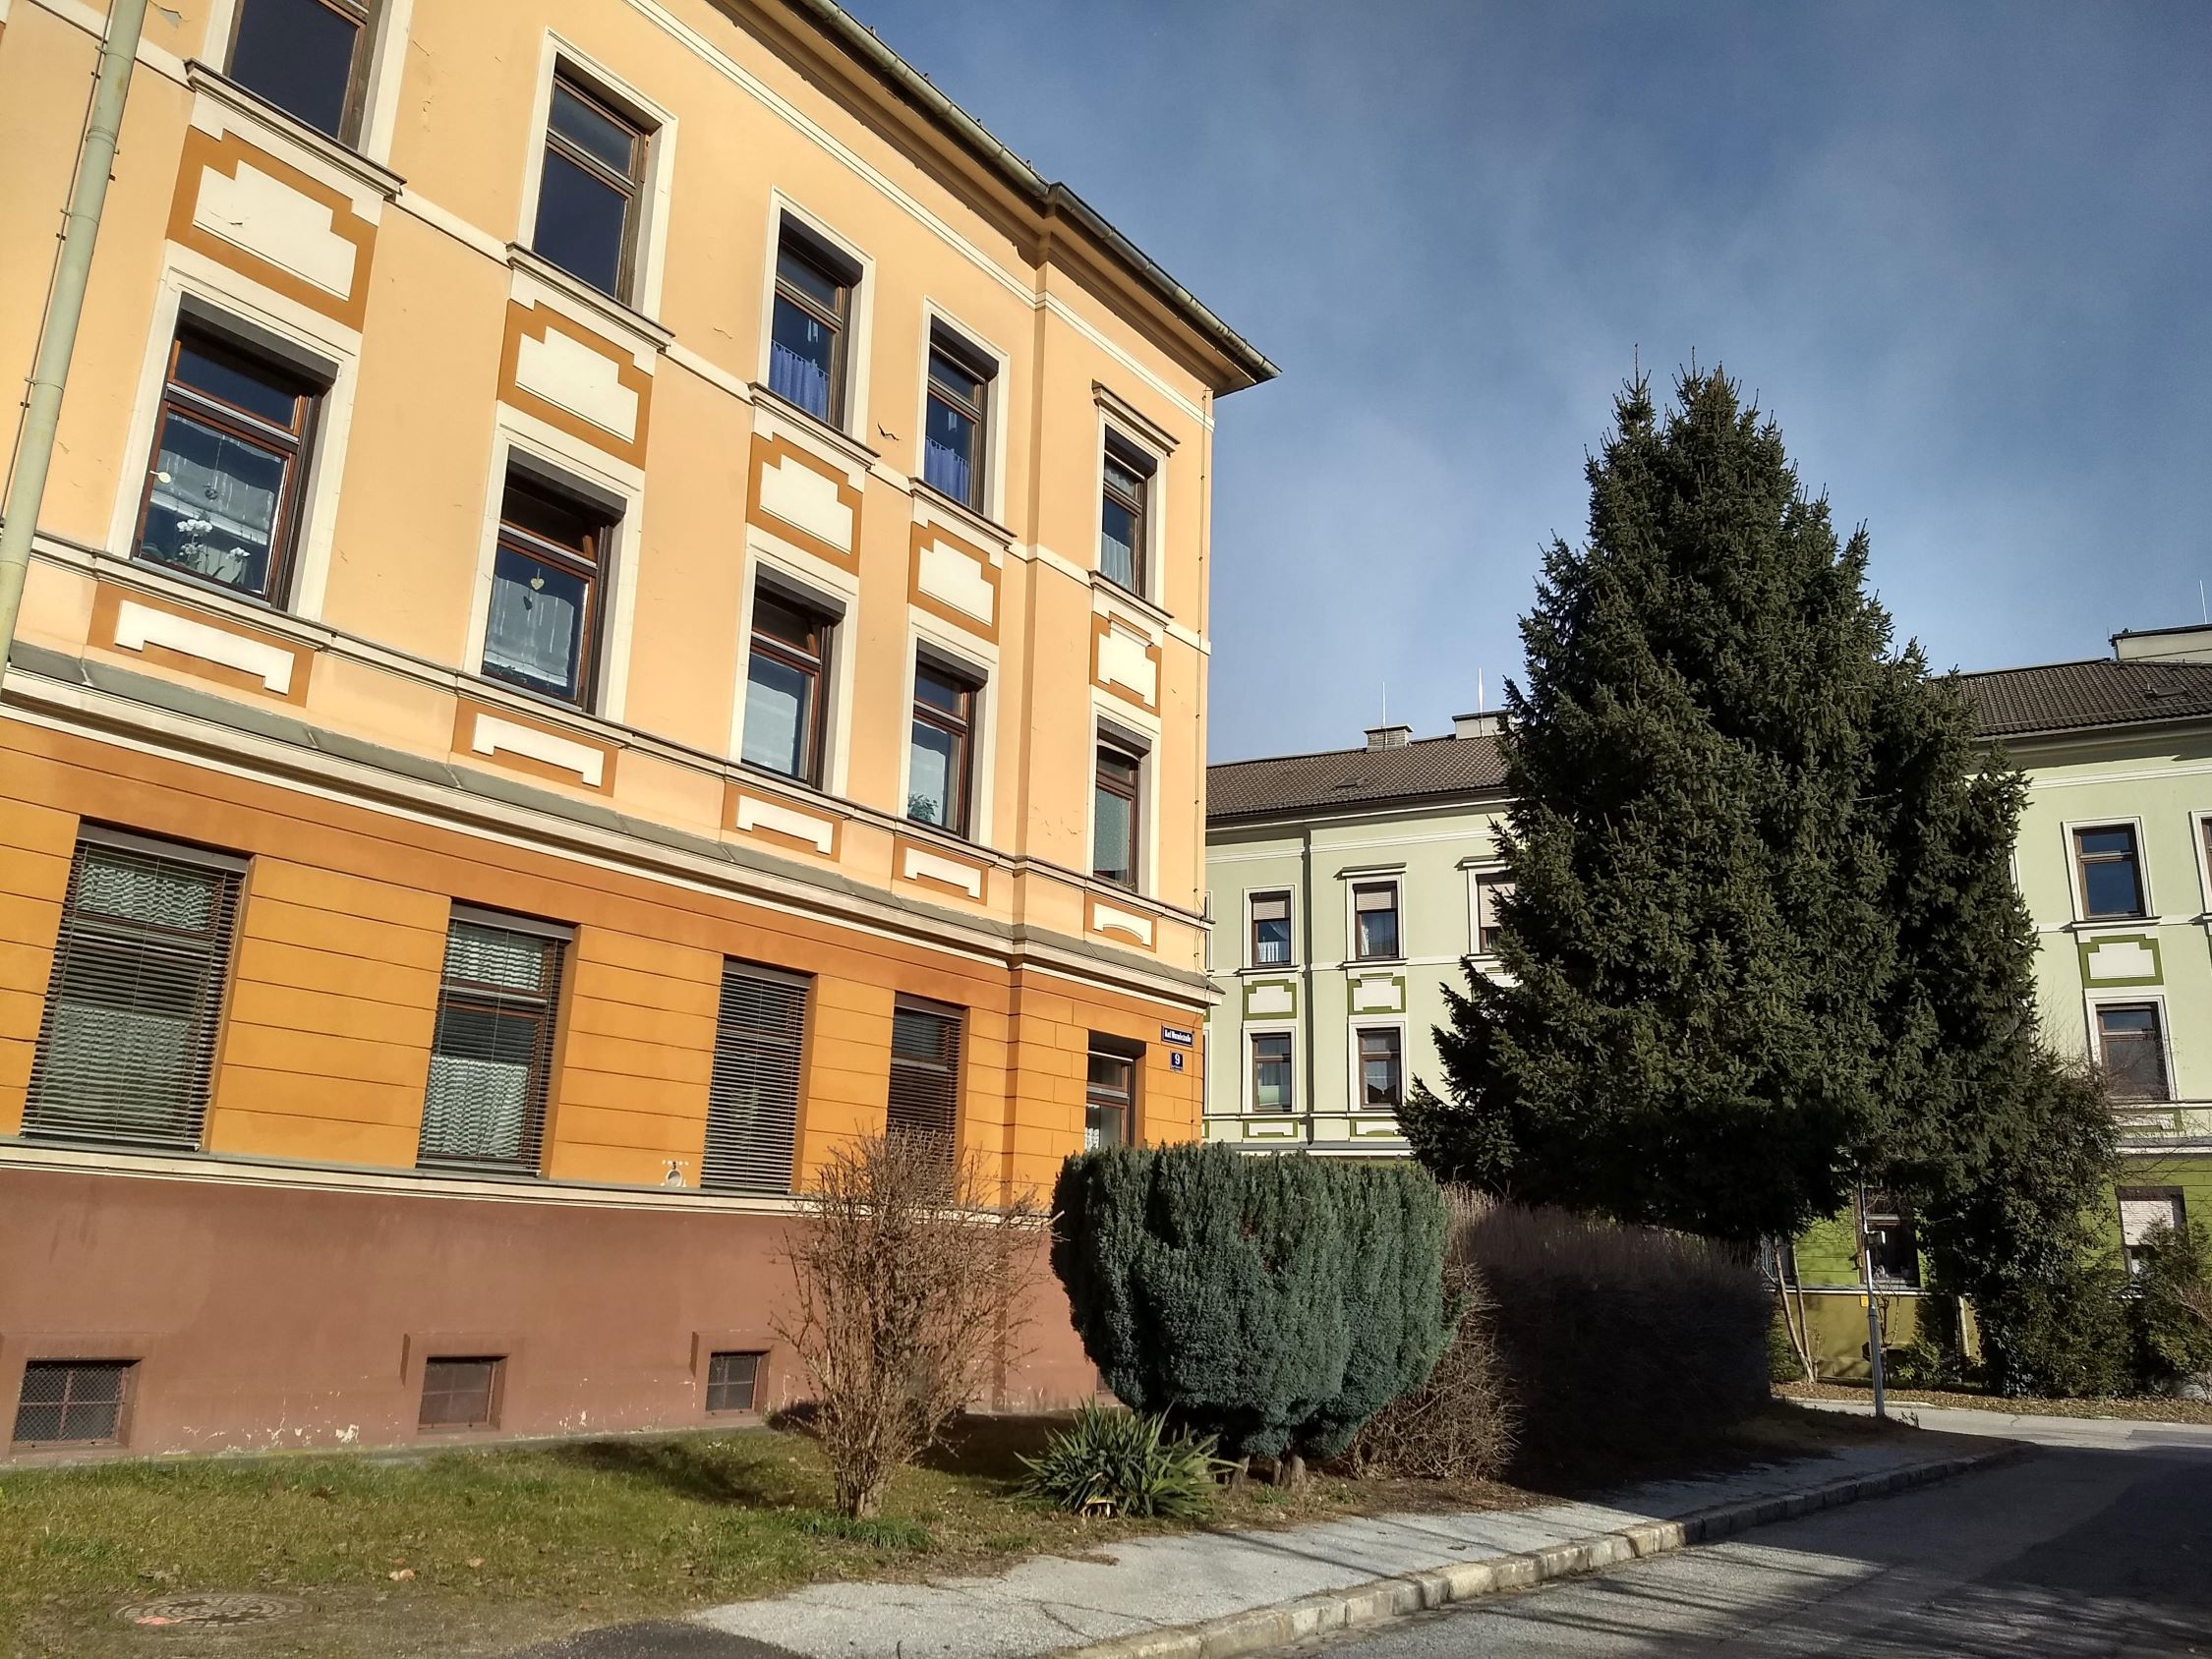 Old Buildings in Villach's area Lind